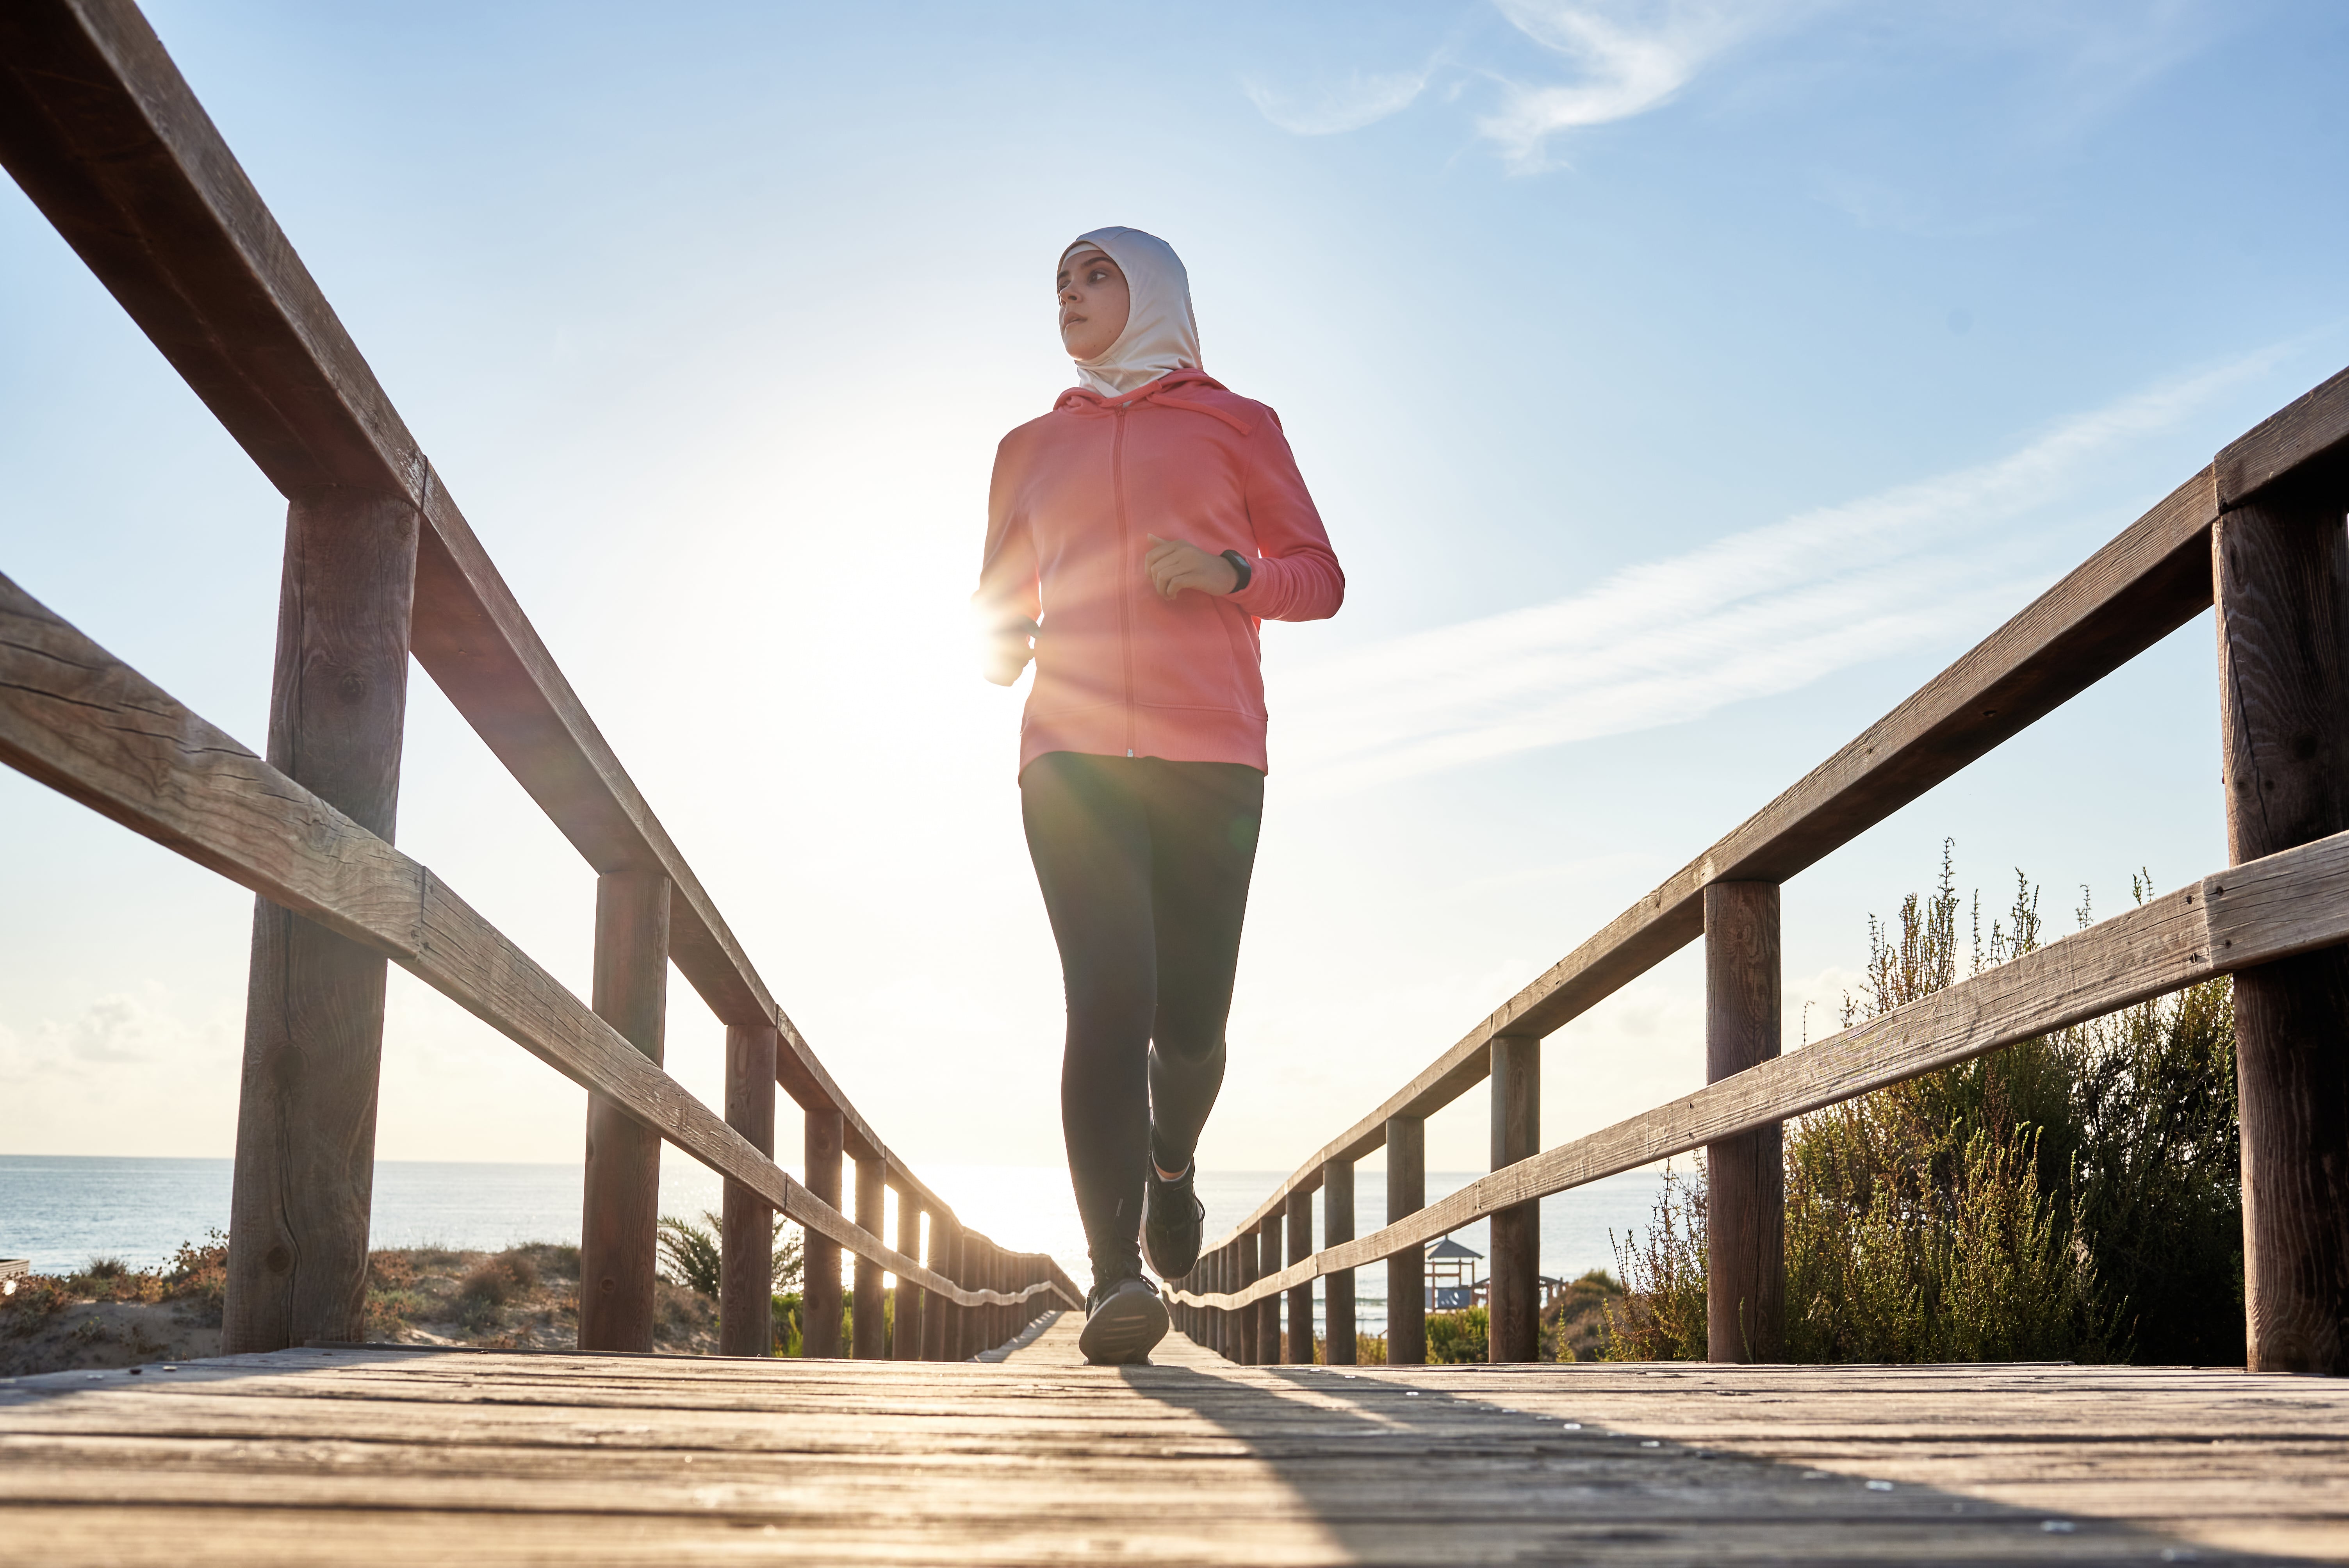 Woman wearing a head covering and athletic clothing jogs across a wooden bridge with the sea and countryside behind her.